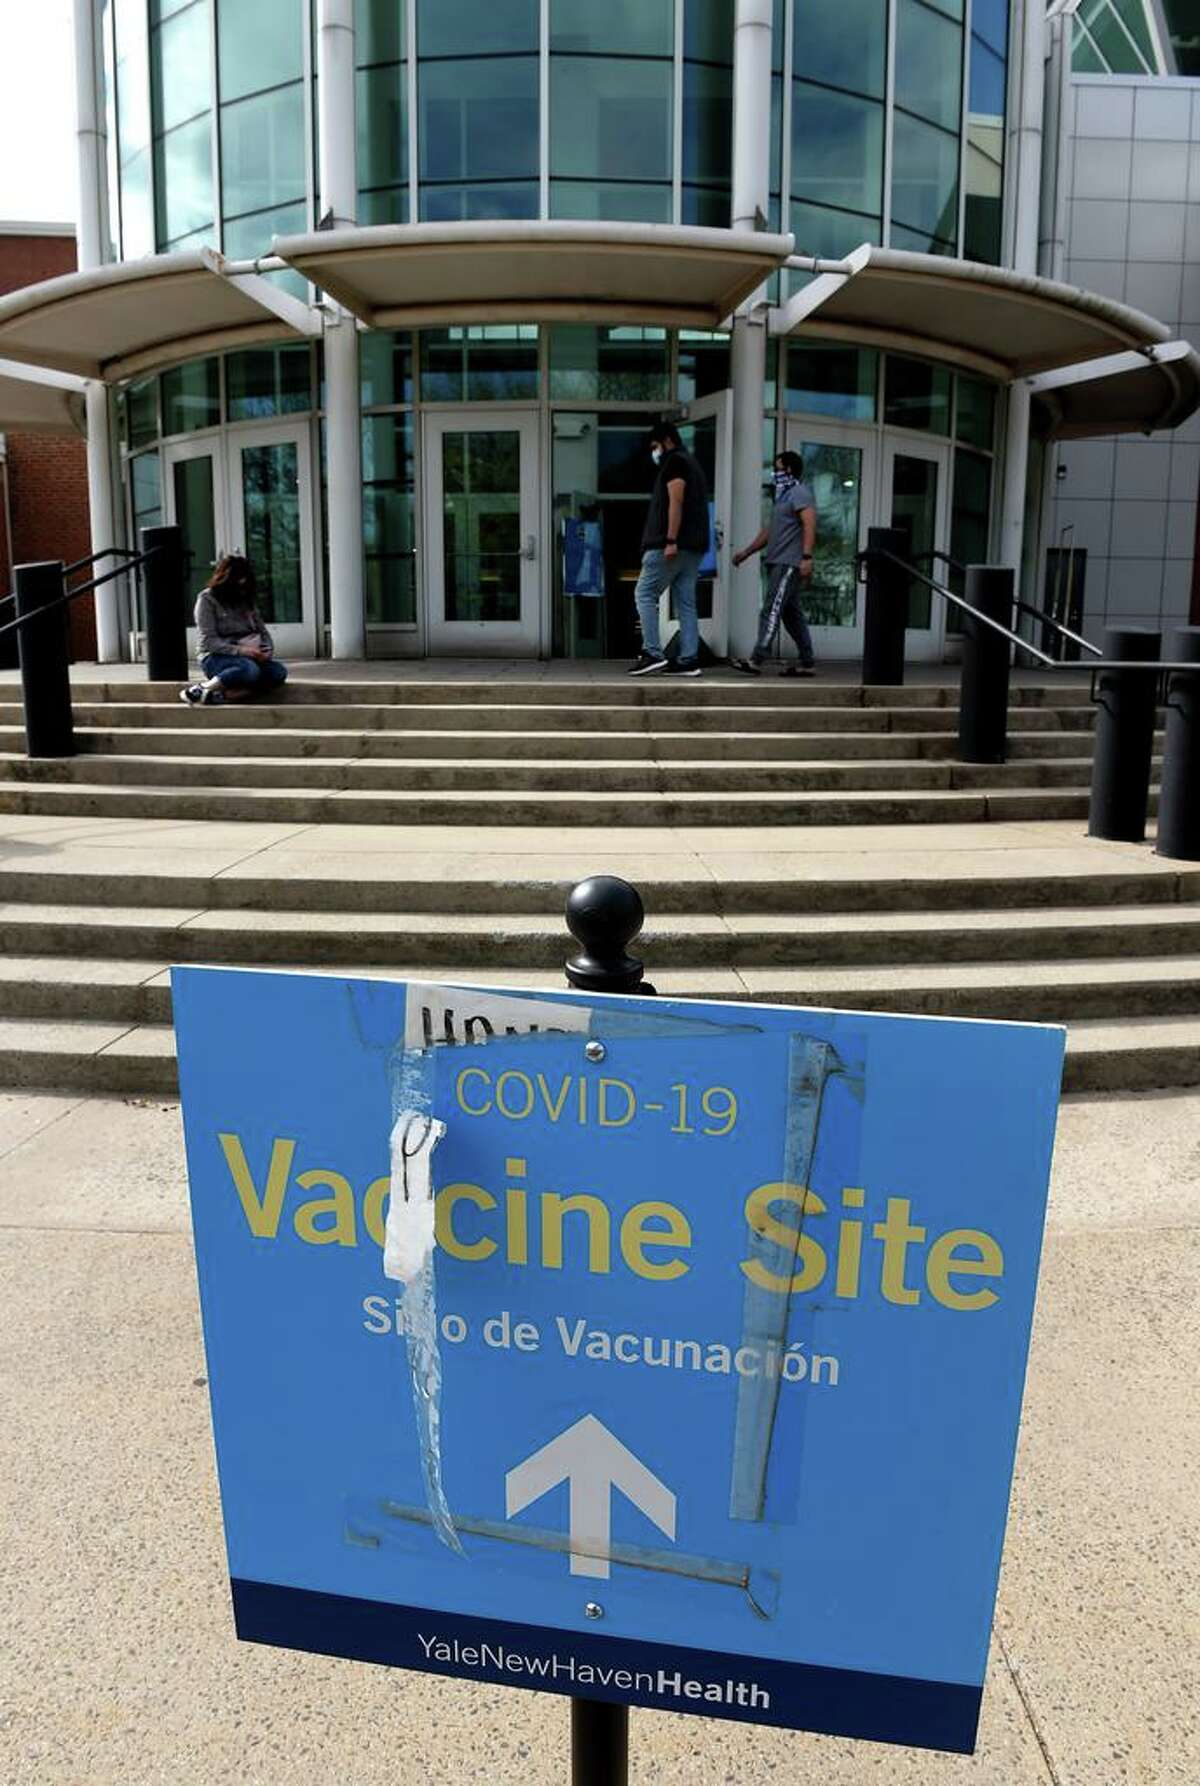 The COVID-19 Vaccination Site at the Floyd Little Athletic Center in New Haven photographed on April 13, 2021.